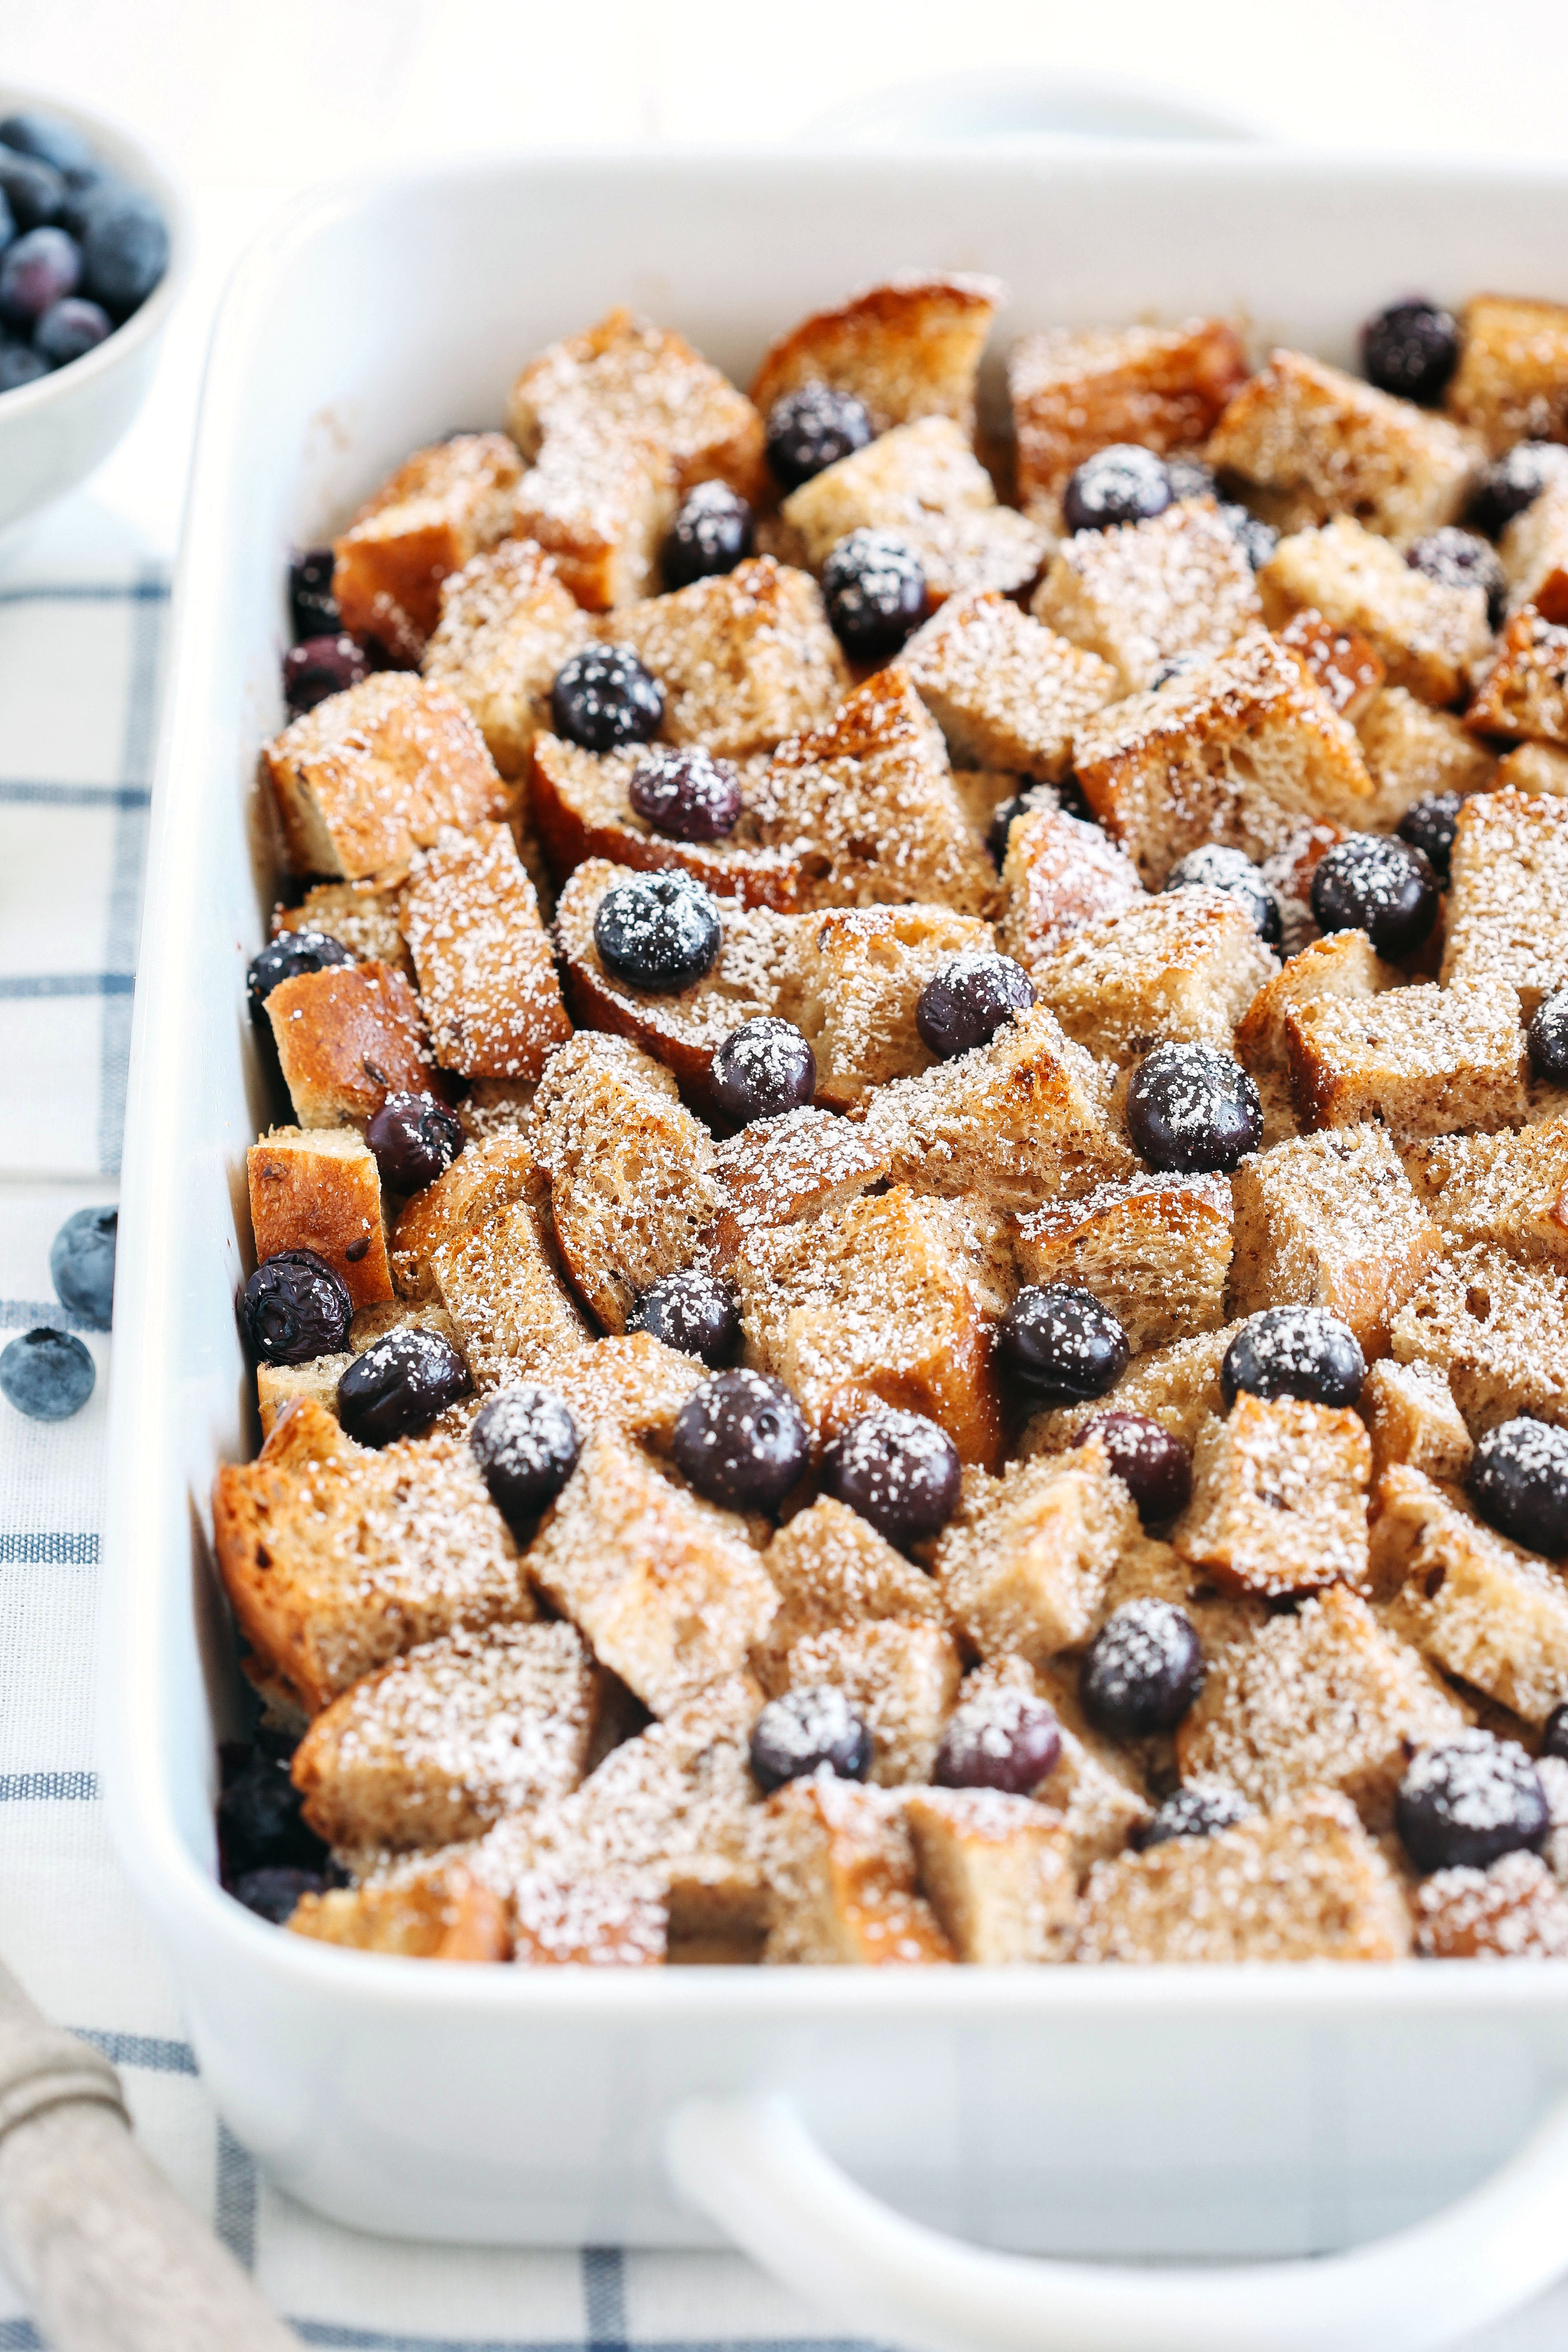 Warm and delicious Overnight Blueberry French Toast Casserole that is lighter in calories, high in protein and can easily be made the night before for the perfect morning breakfast!